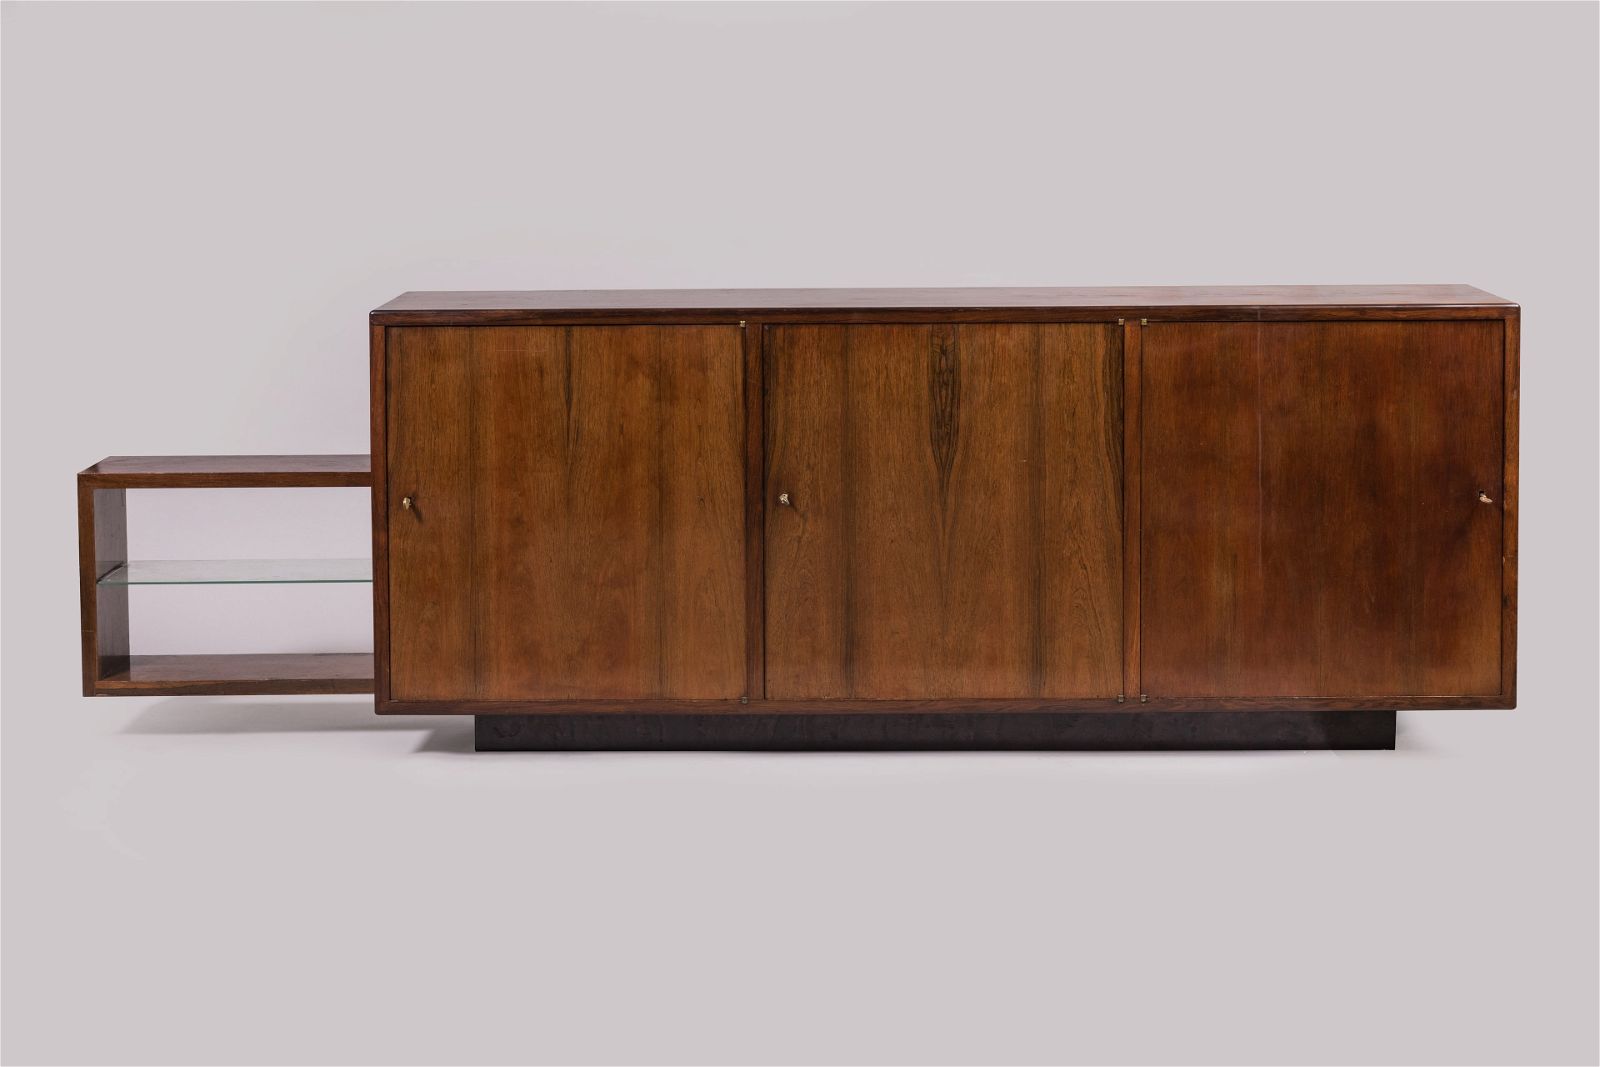 Pierre Chareau sideboard, a variant of model MA788, which sold for €13,020 ($14,100) with buyer’s premium at Valoir Pousse-Cornet.
